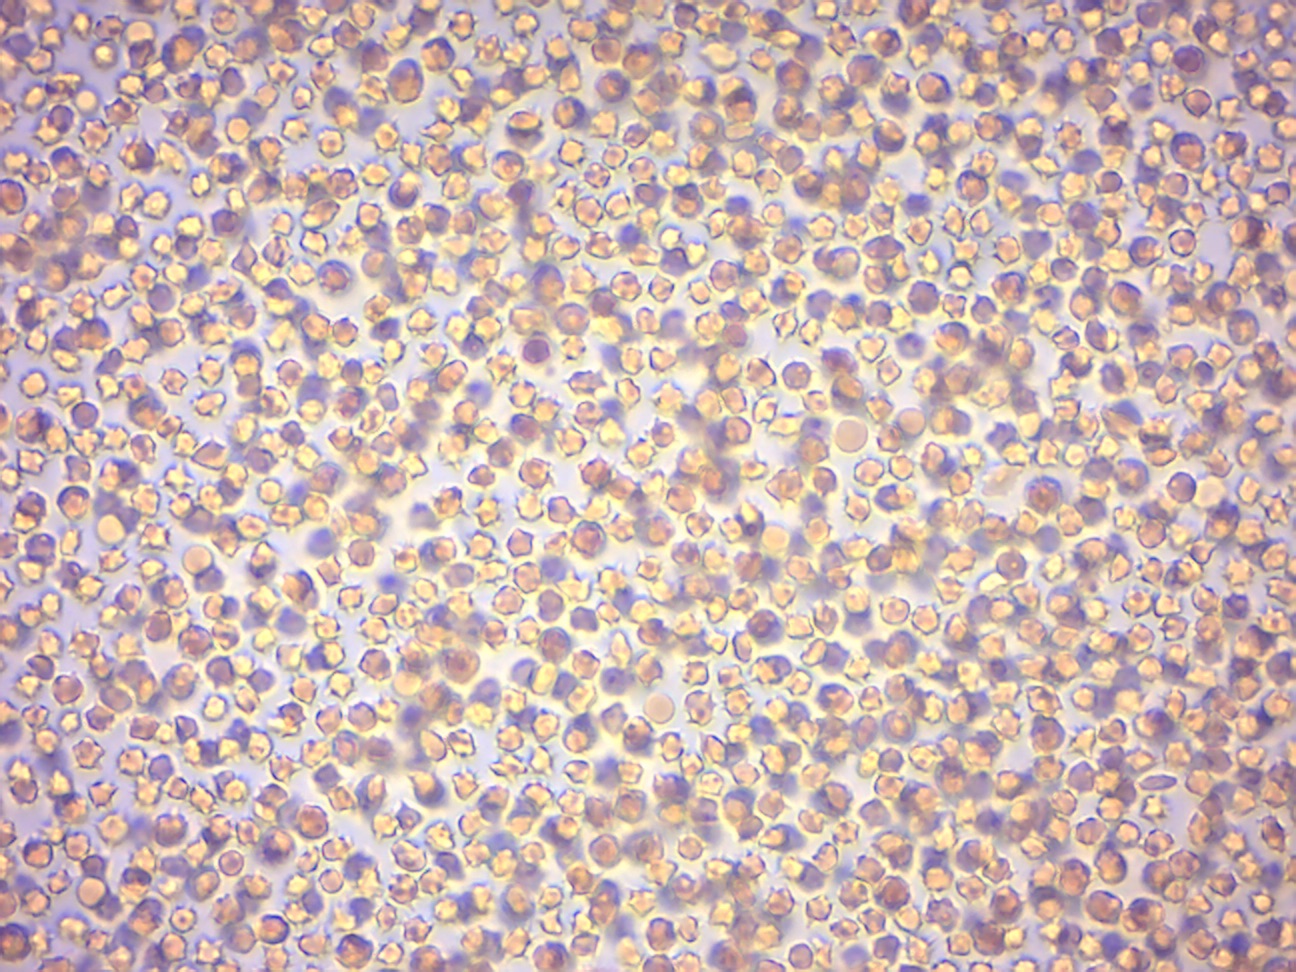 Red blood cells from sheep in hypertonic saline solution (5% NaCl).